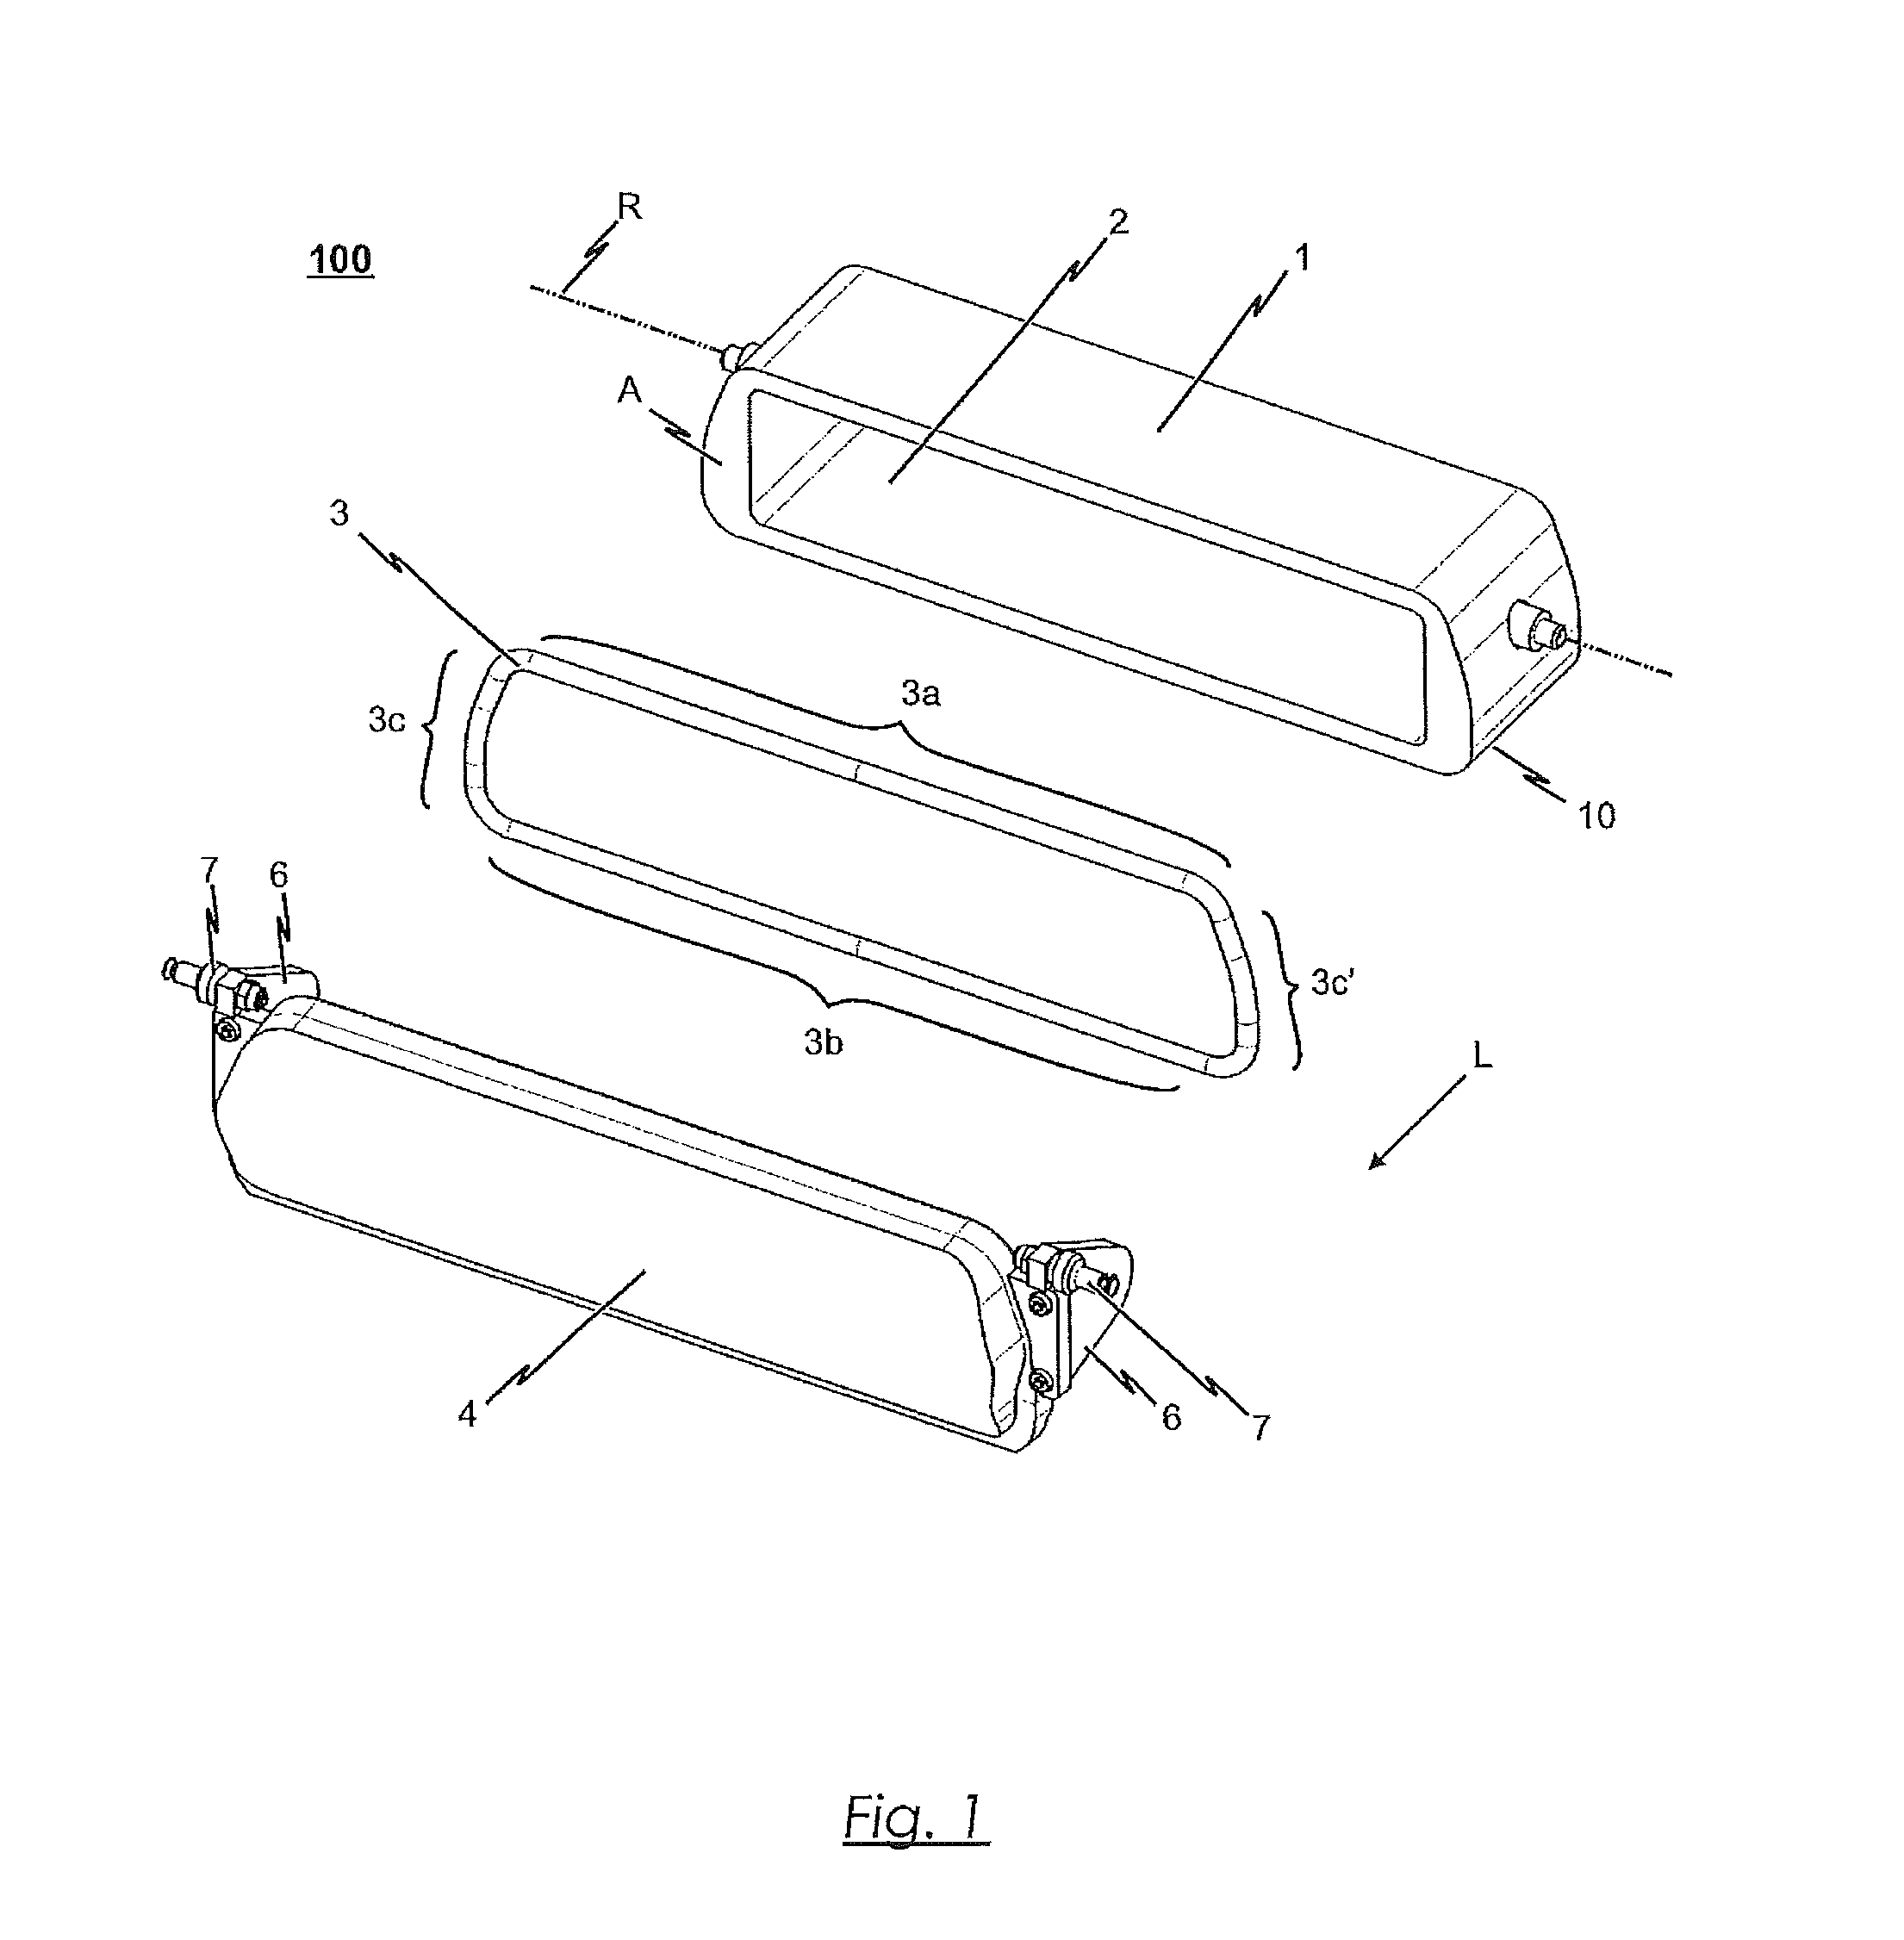 Electrical contact coupling for a track-borne vehicle, particularly a railway vehicle